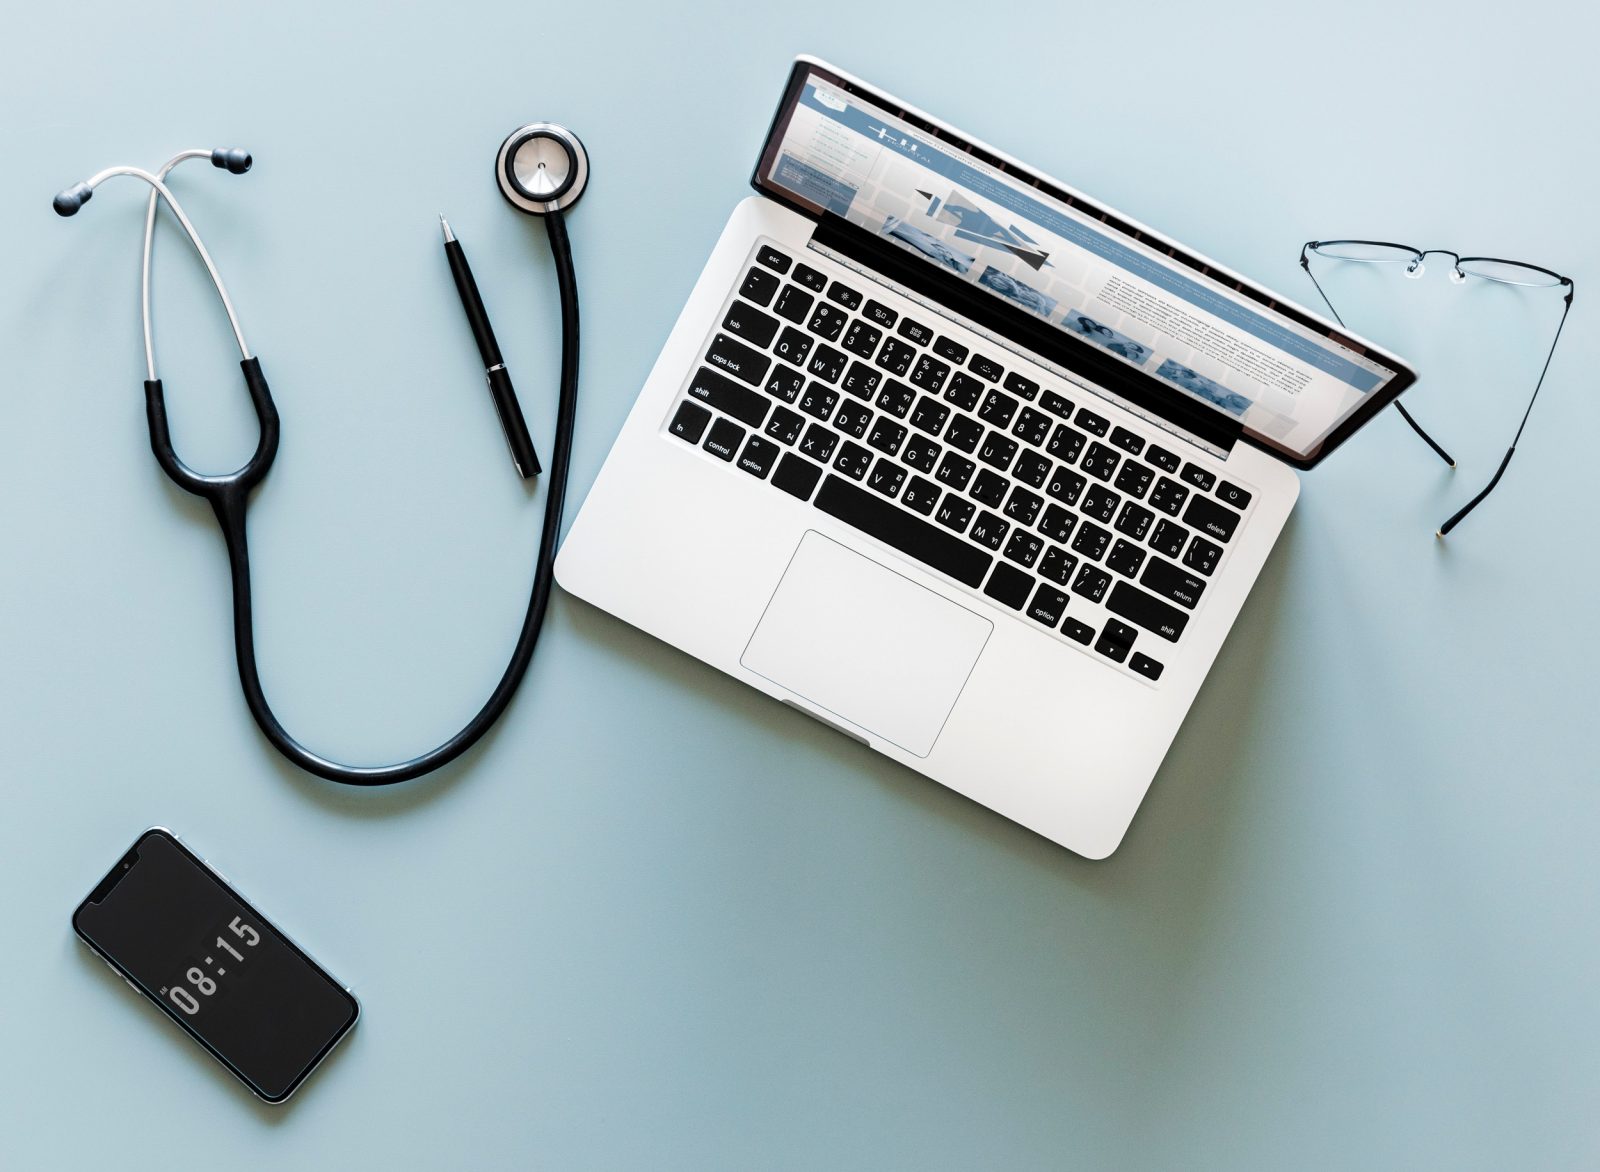 Top 5 Email Marketing Tips for Doctors and Medical Professionals